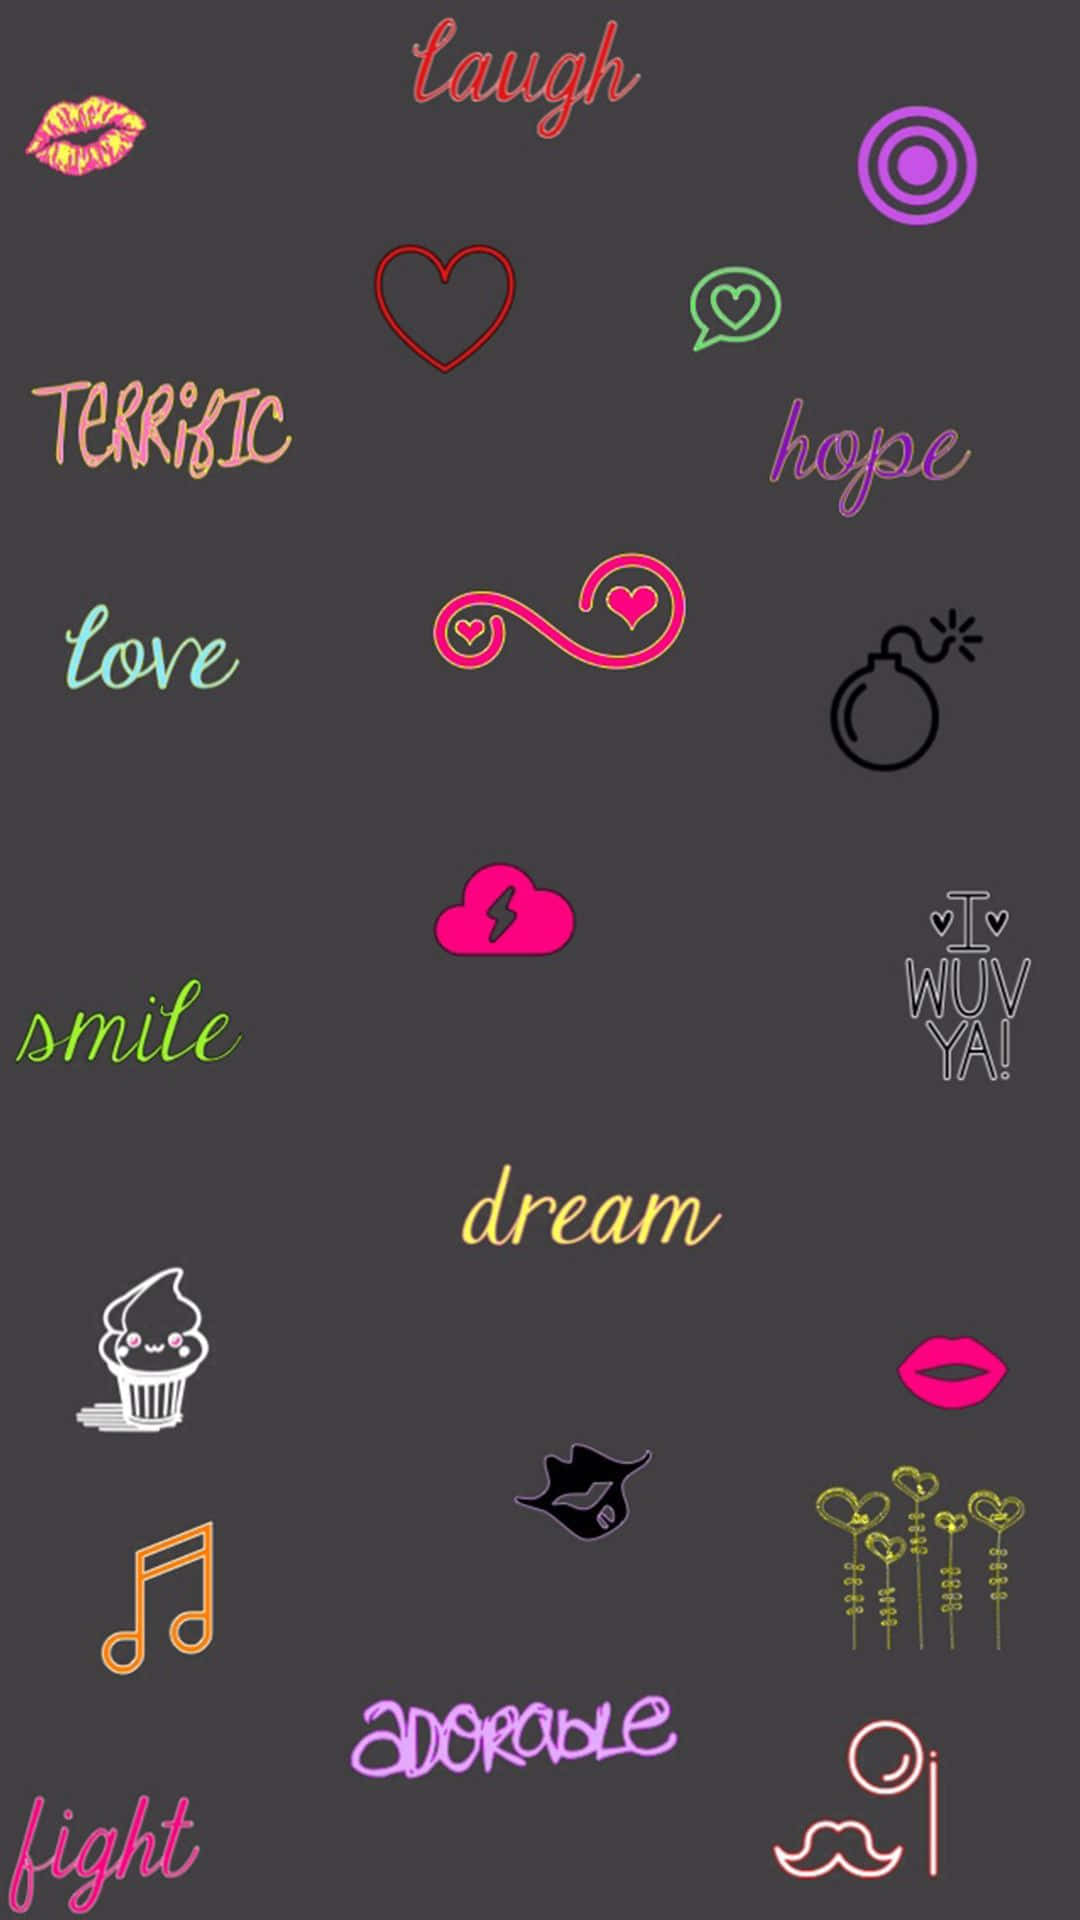 Free Girly Wallpaper Downloads, [400+] Girly Wallpapers for FREE |  